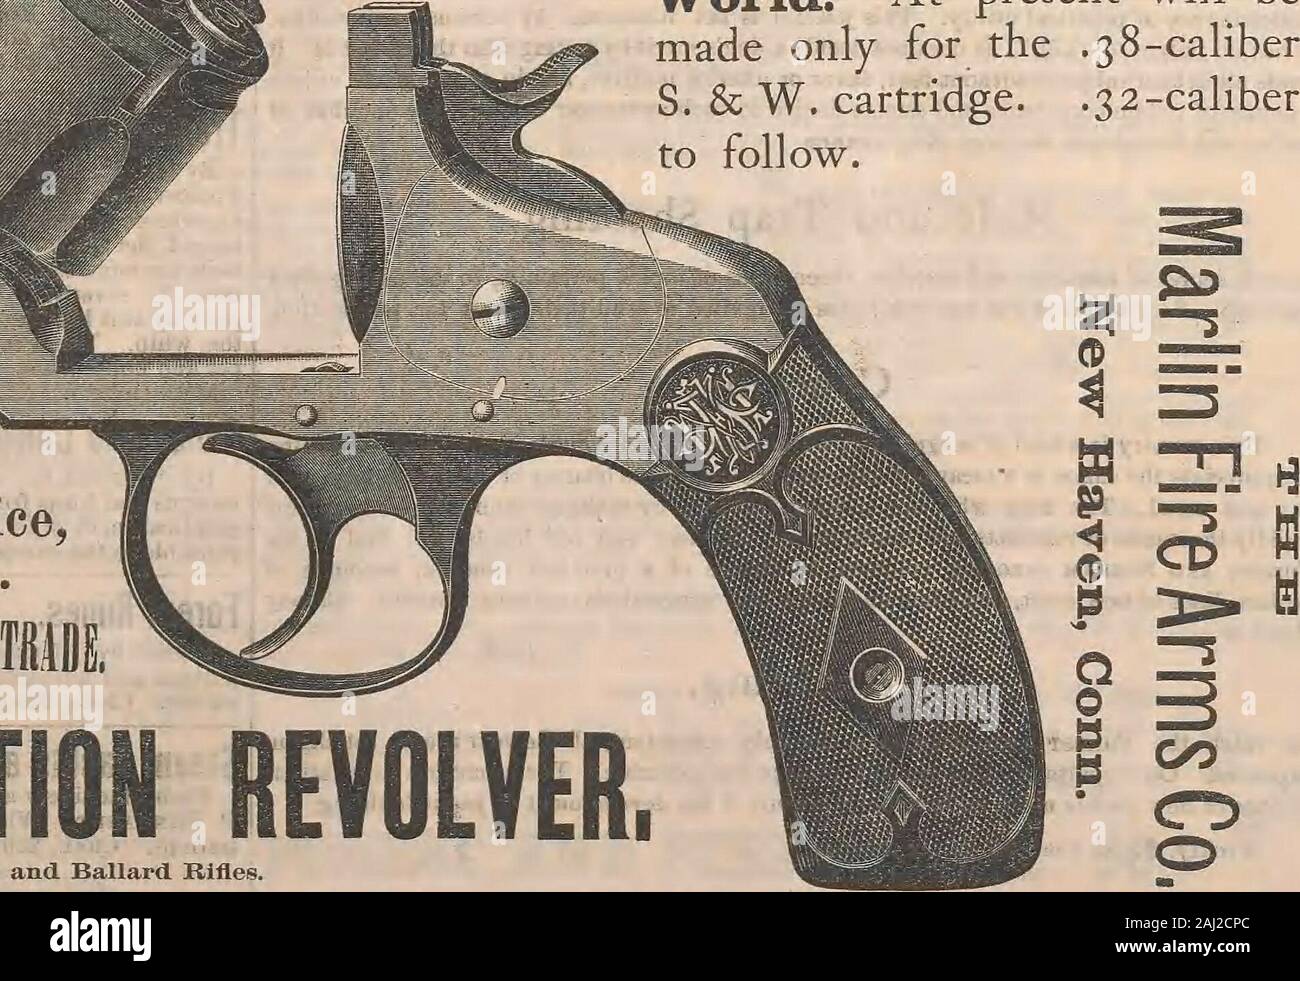 Forest and stream . This new Revolver is now ready for deliv-ery. It is almost a fac-simile of the celebratedSMITH & WESSON, and is guaranteed equalin quality and finish to any pistol in theWorld. At present will bemade only for the .38-caliberS. & W. cartridge. .32-caliberto follow. Retail Price,$11.00. GO CD MARLIN DOUBLE-ACTION REVOLVER, Send for Catalogue of Marlin and Ballard Rifles. Sole Agents, SCHOVERLING, DALY & GILES, 84 & 86 Chambers Street, New York City.. Stock Photo